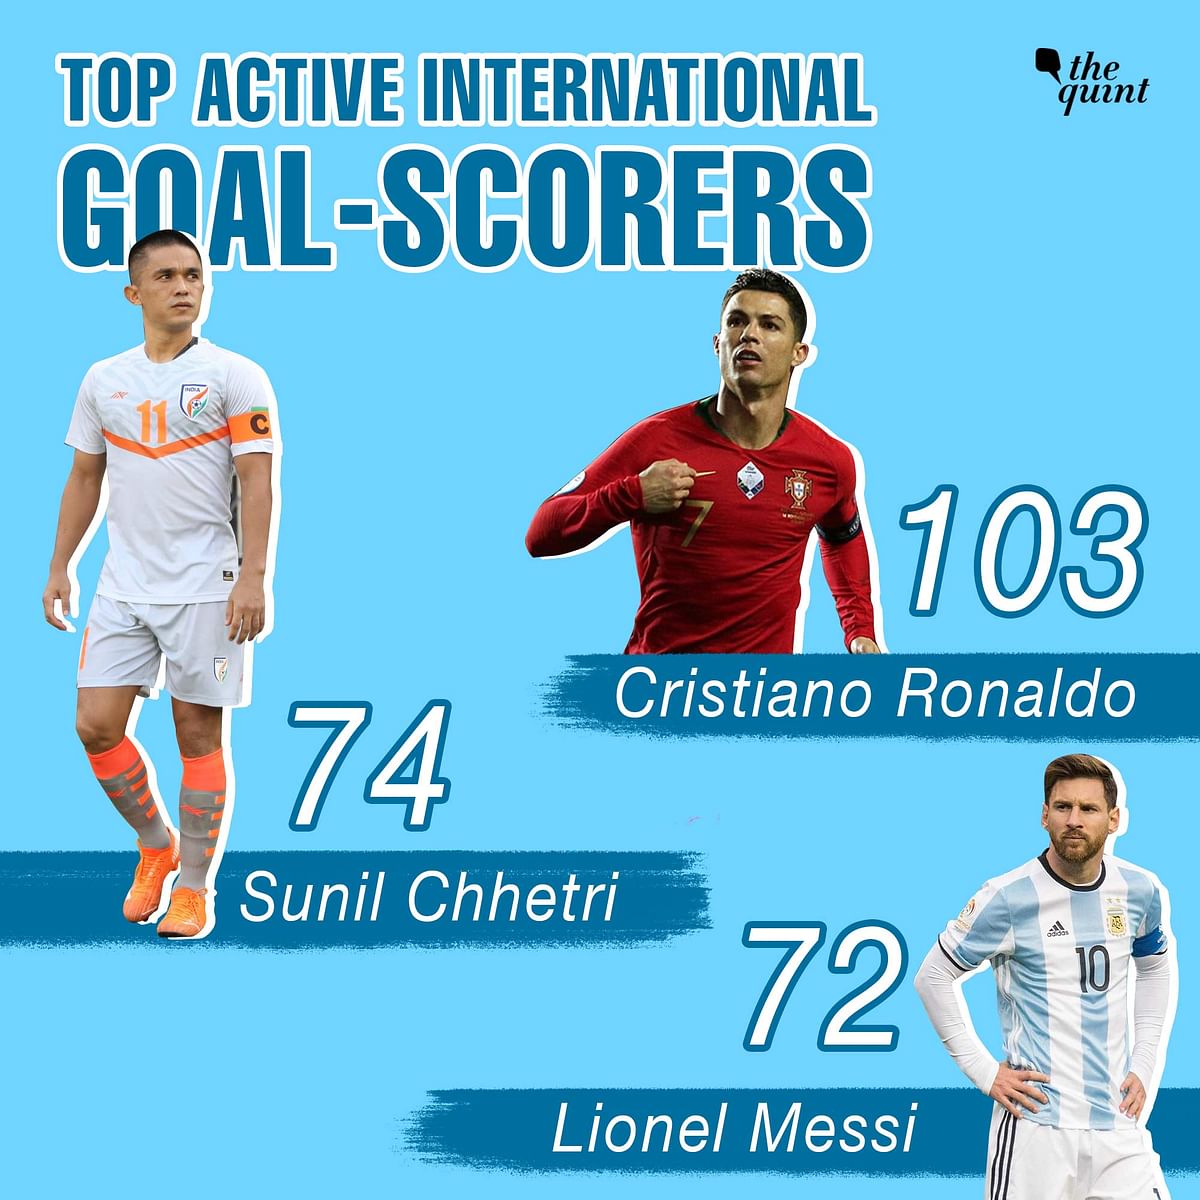 He became the second-highest active international goal-scorer with 74 strikes, now only  behind Cristiano Ronaldo. 